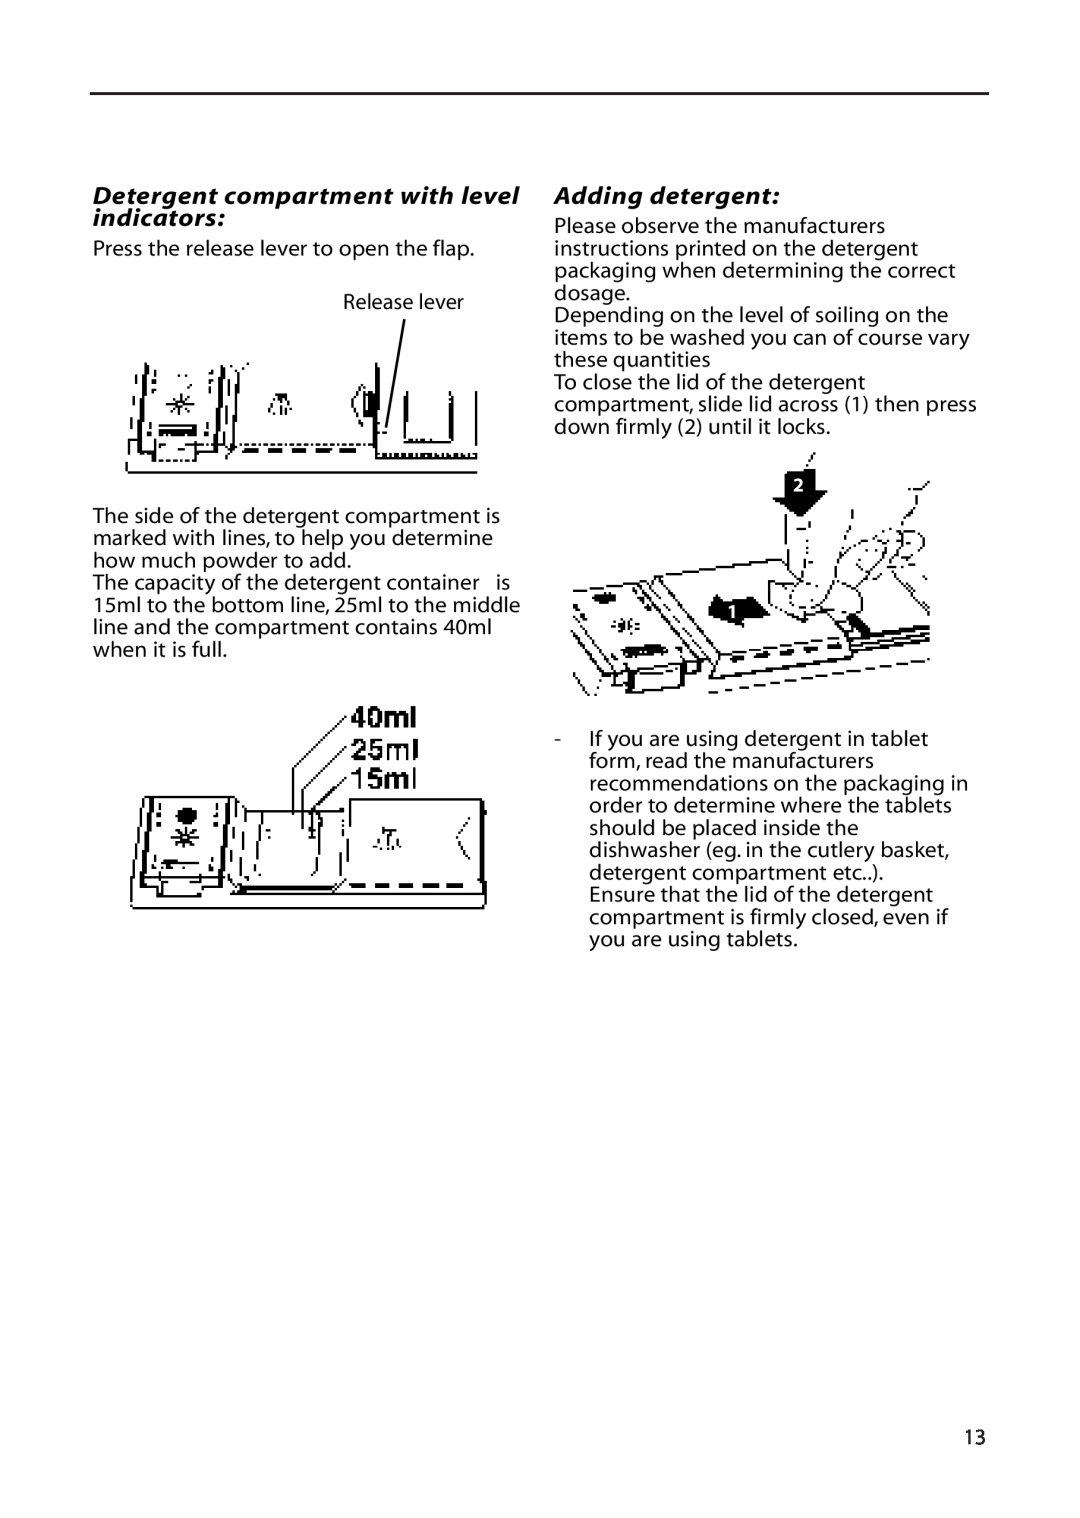 Hotpoint DWF60, DWF61 installation instructions Detergent compartment with level indicators, Adding detergent 